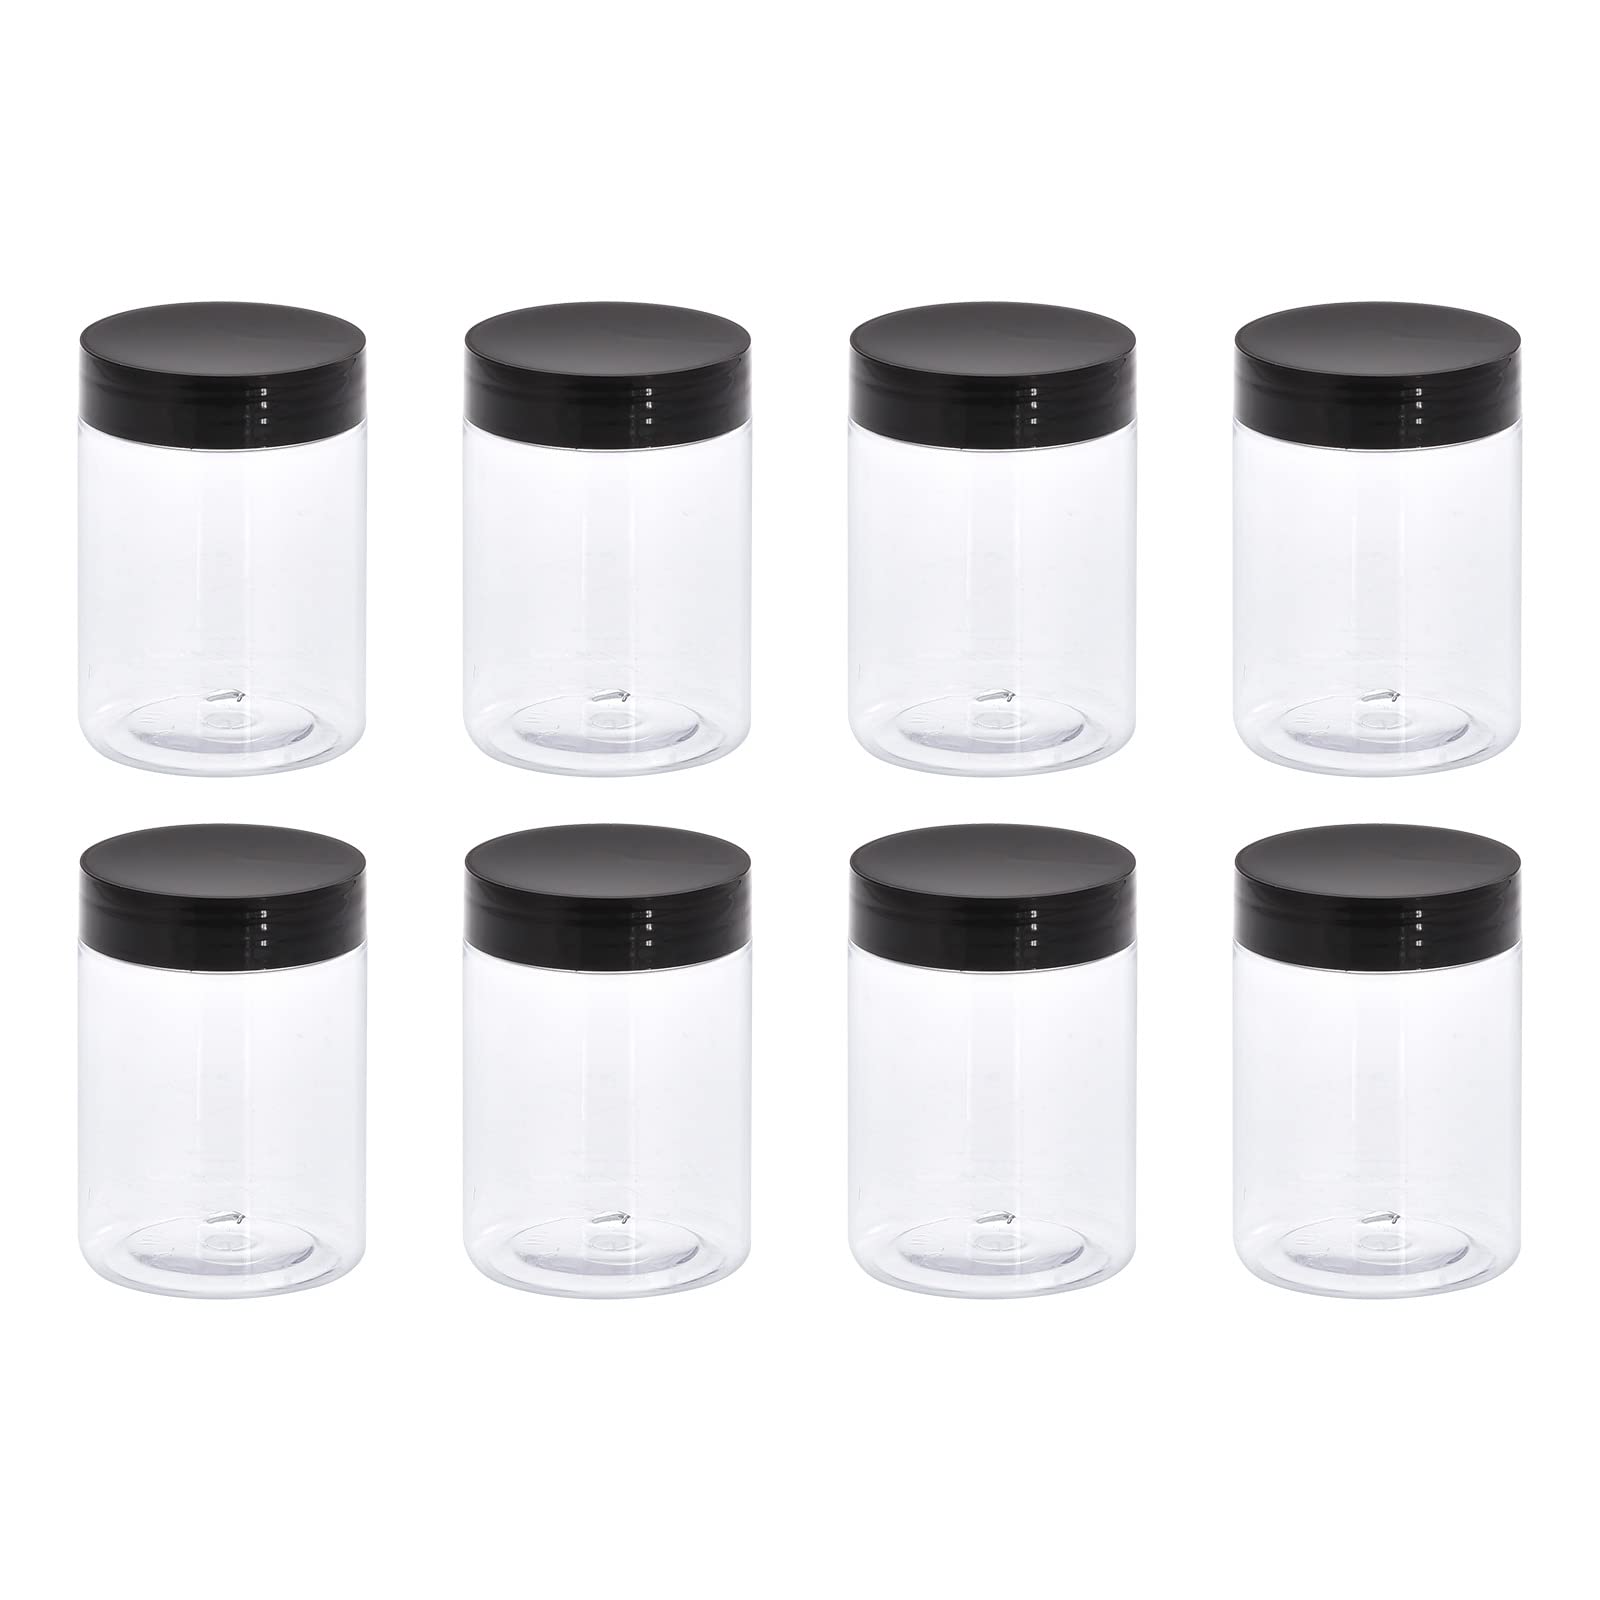 uxcell Round Plastic Jars with Black Screw Top Lid, 10oz/ 300ml Wide-mouth Clear Empty Containers for Storage, Organizing, 10Pcs